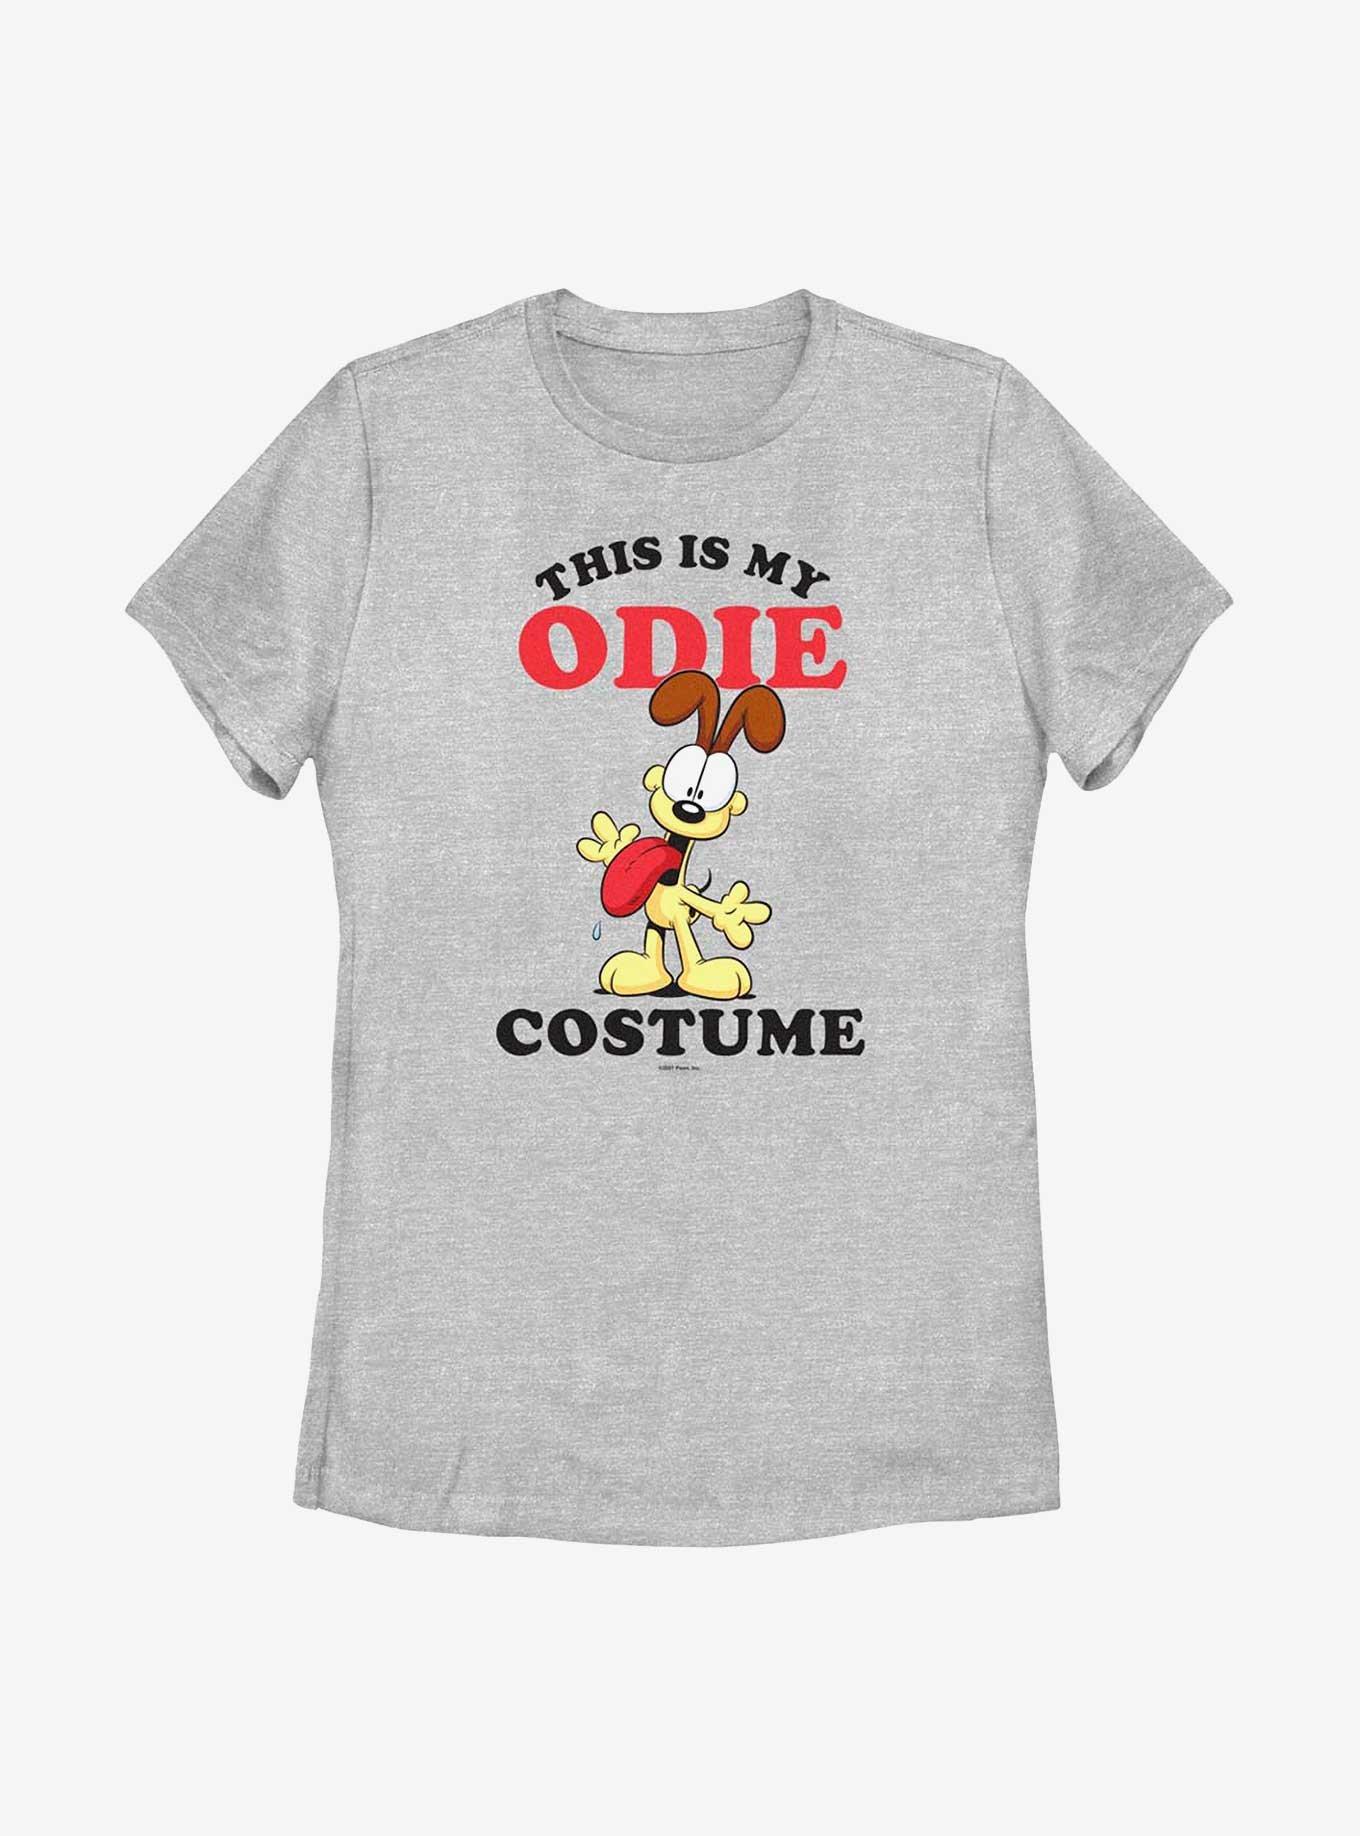 Garfield Odie Costume Women's T-Shirt, ATH HTR, hi-res